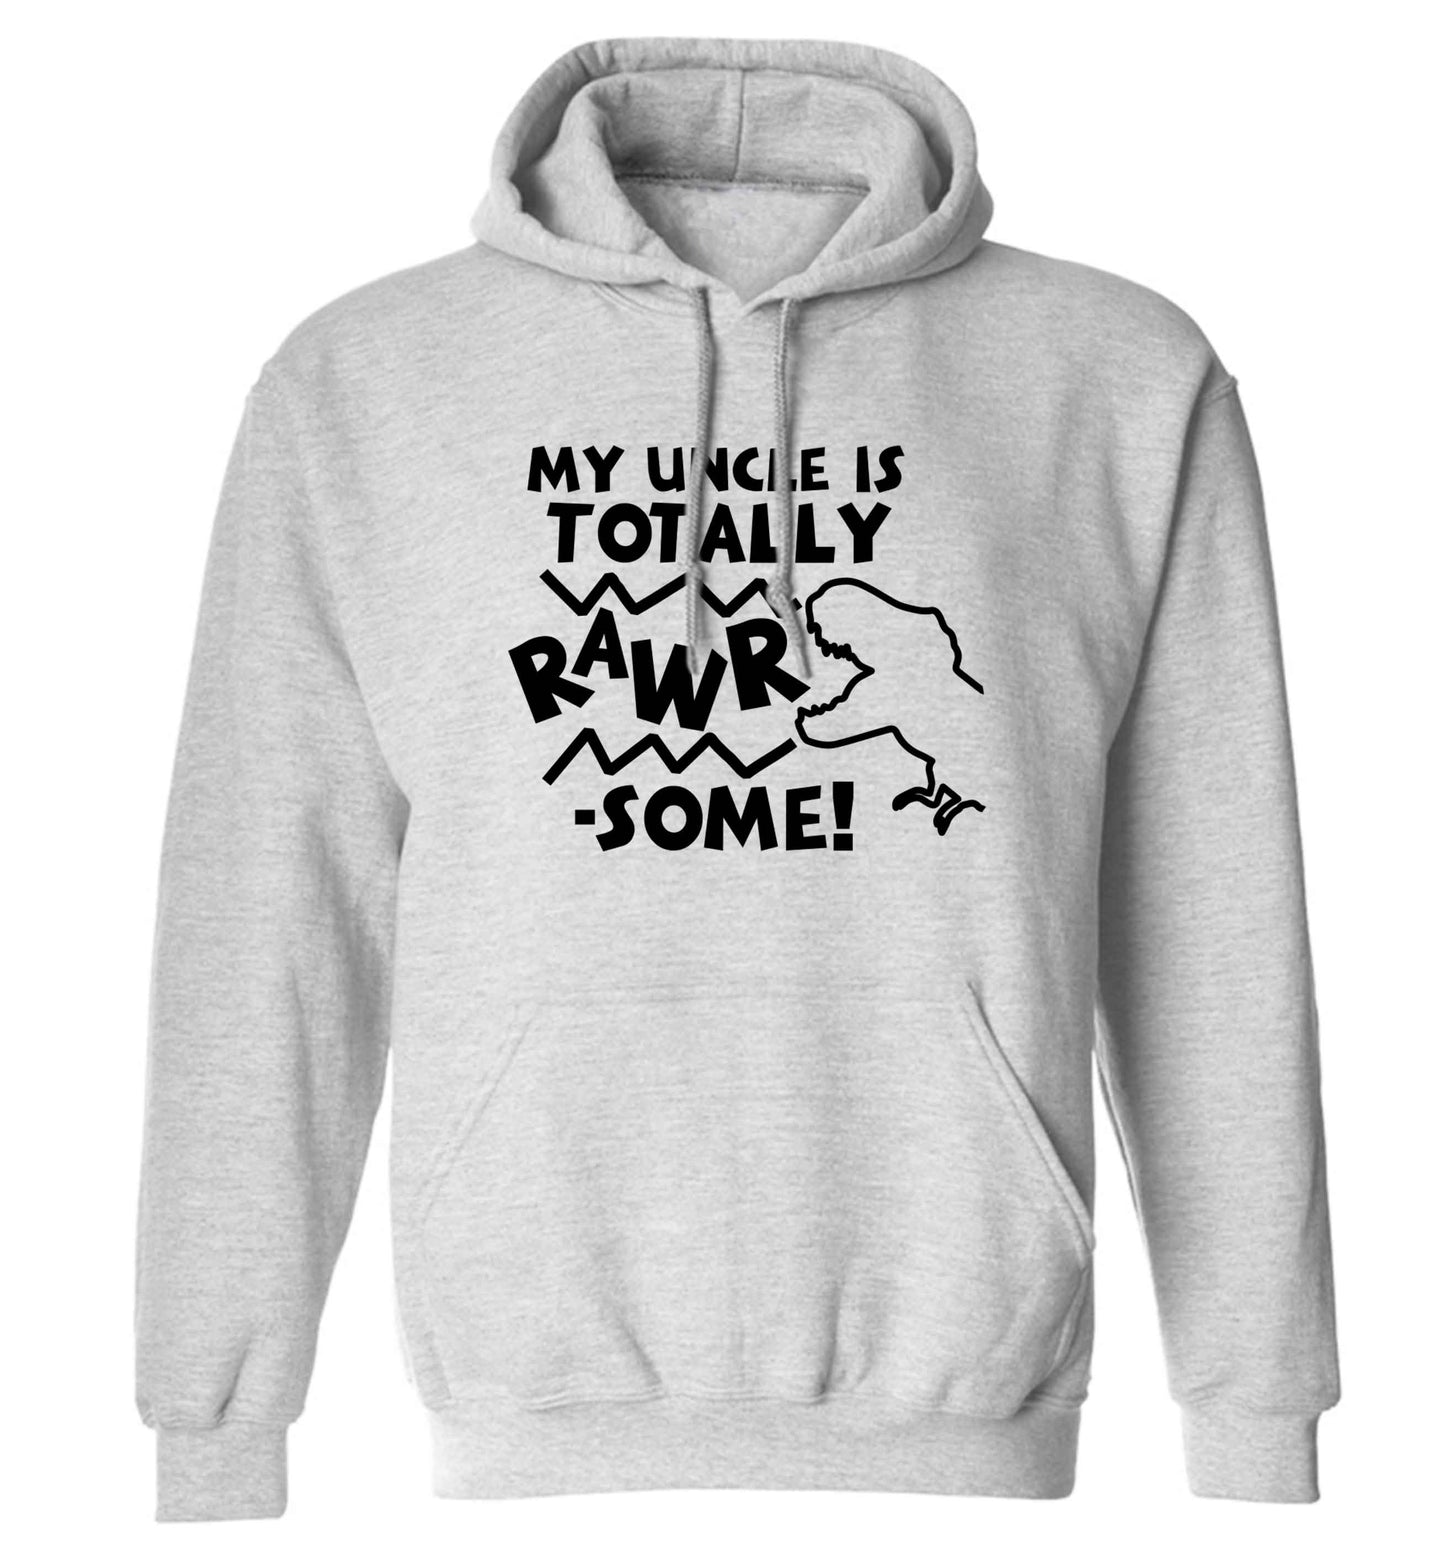 My uncle is totally rawrsome adults unisex grey hoodie 2XL